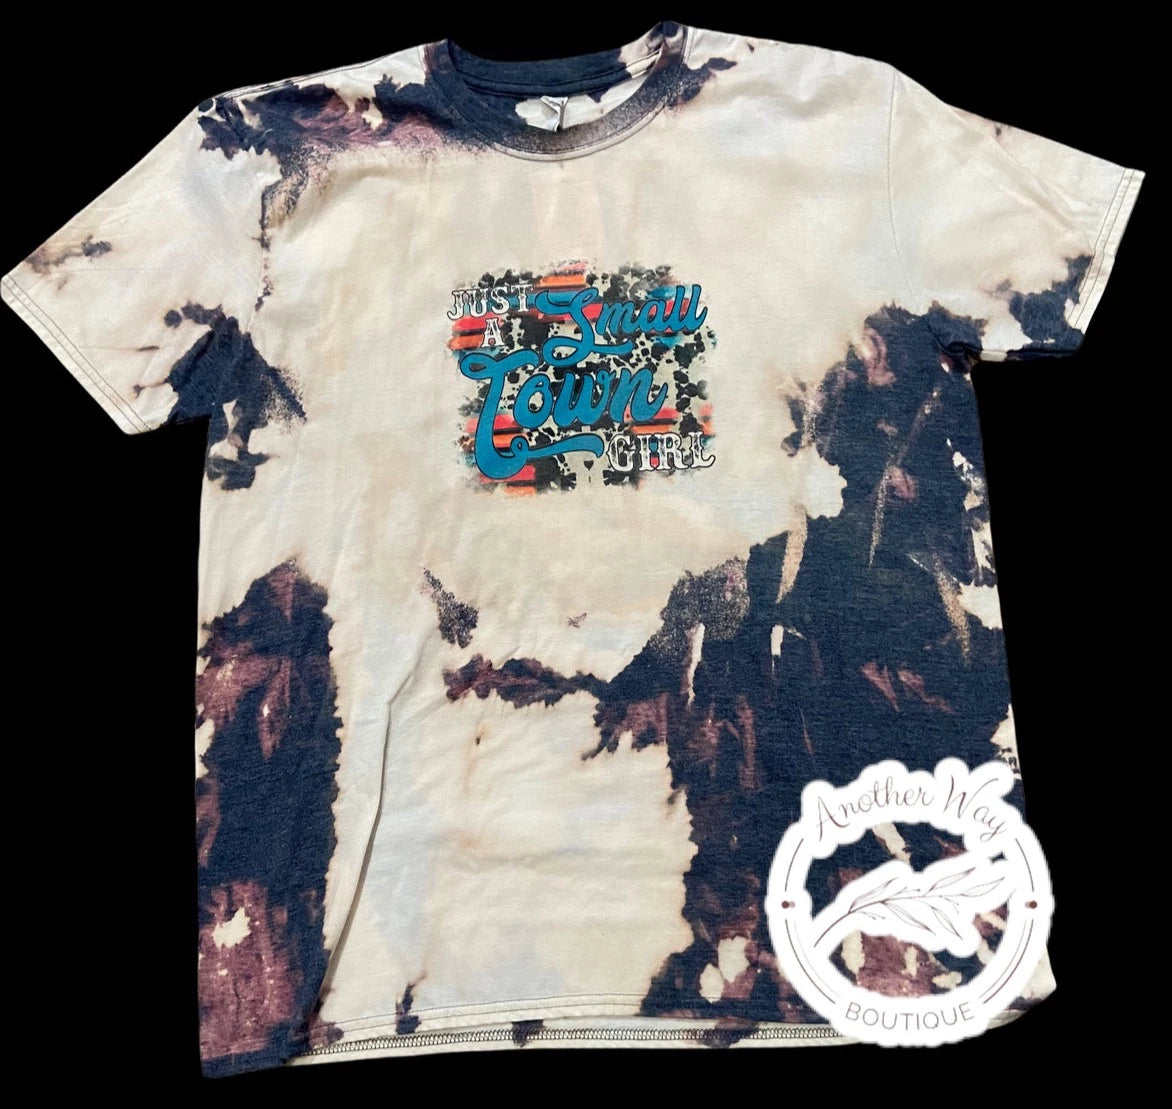 “Small Town Girl” Bleached shirt - Another Way Boutique